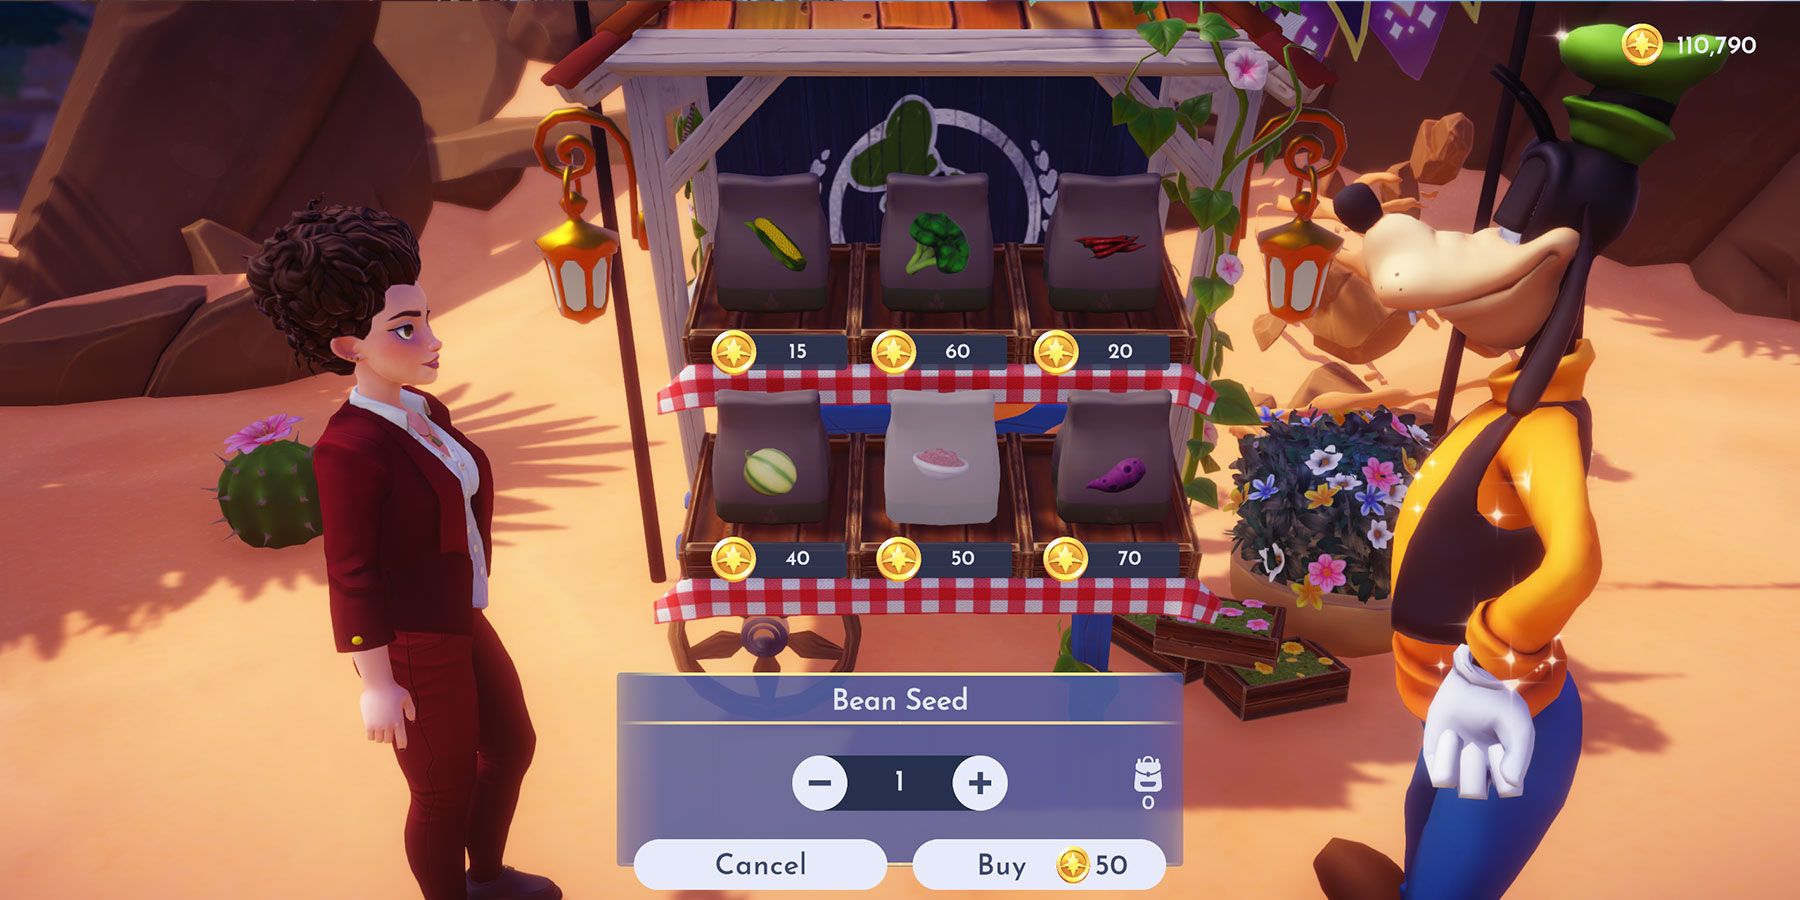 Buying Bean Seeds from Goofy's Stall in Disney Dreamlight Valley.